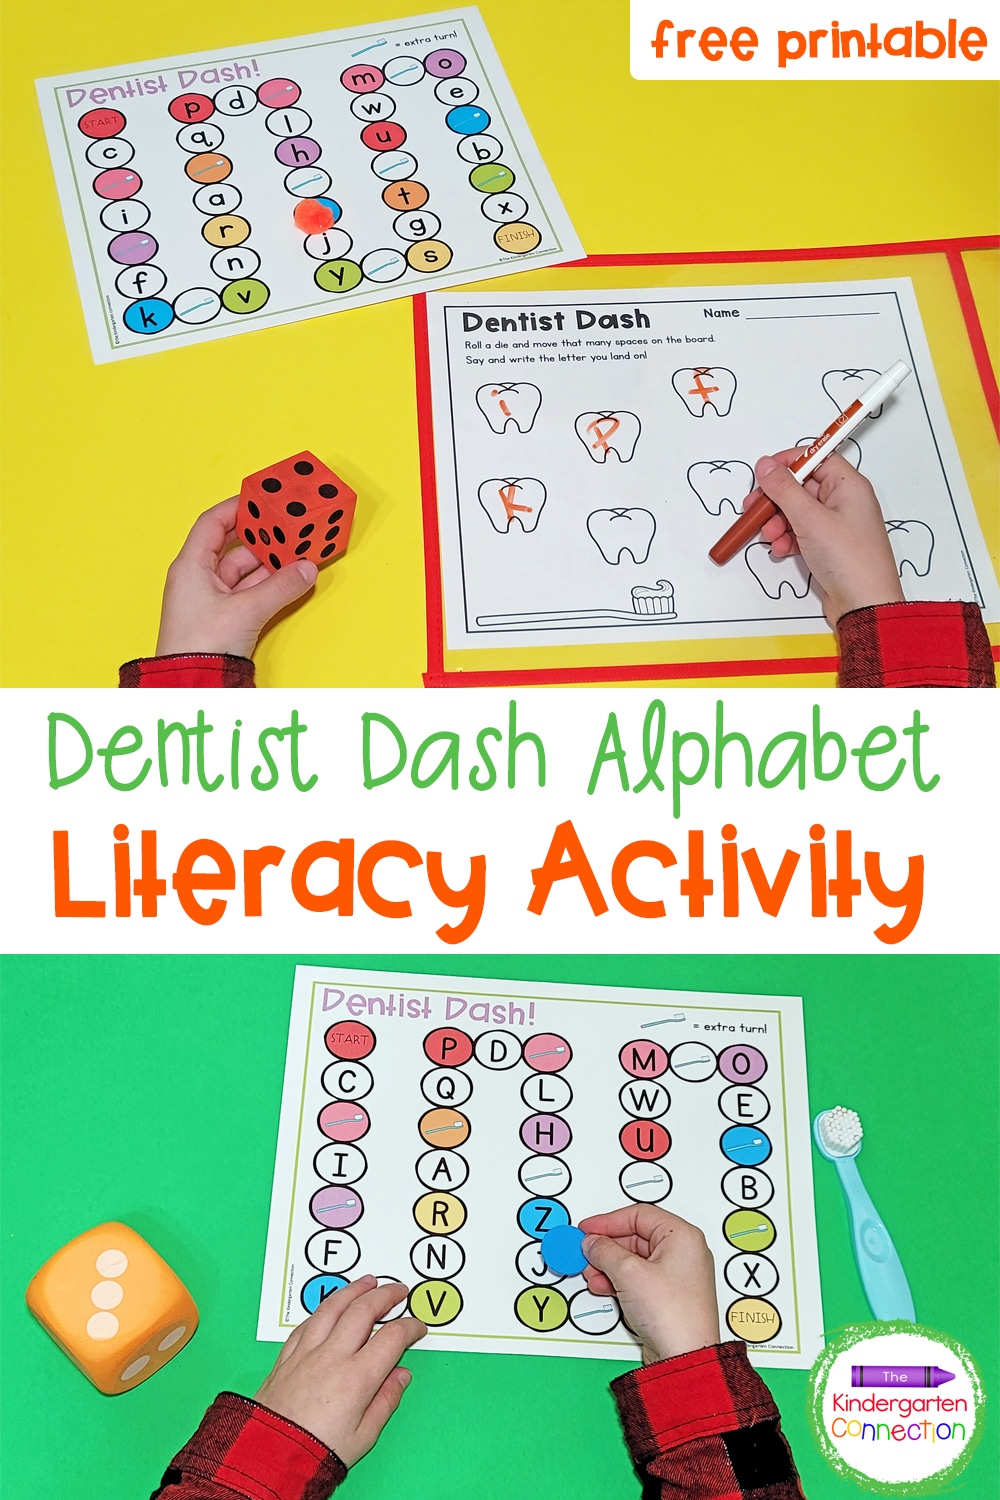 This free Dentist Dash Alphabet Activity will help your students build letter recognition skills and writing skills in February or anytime!